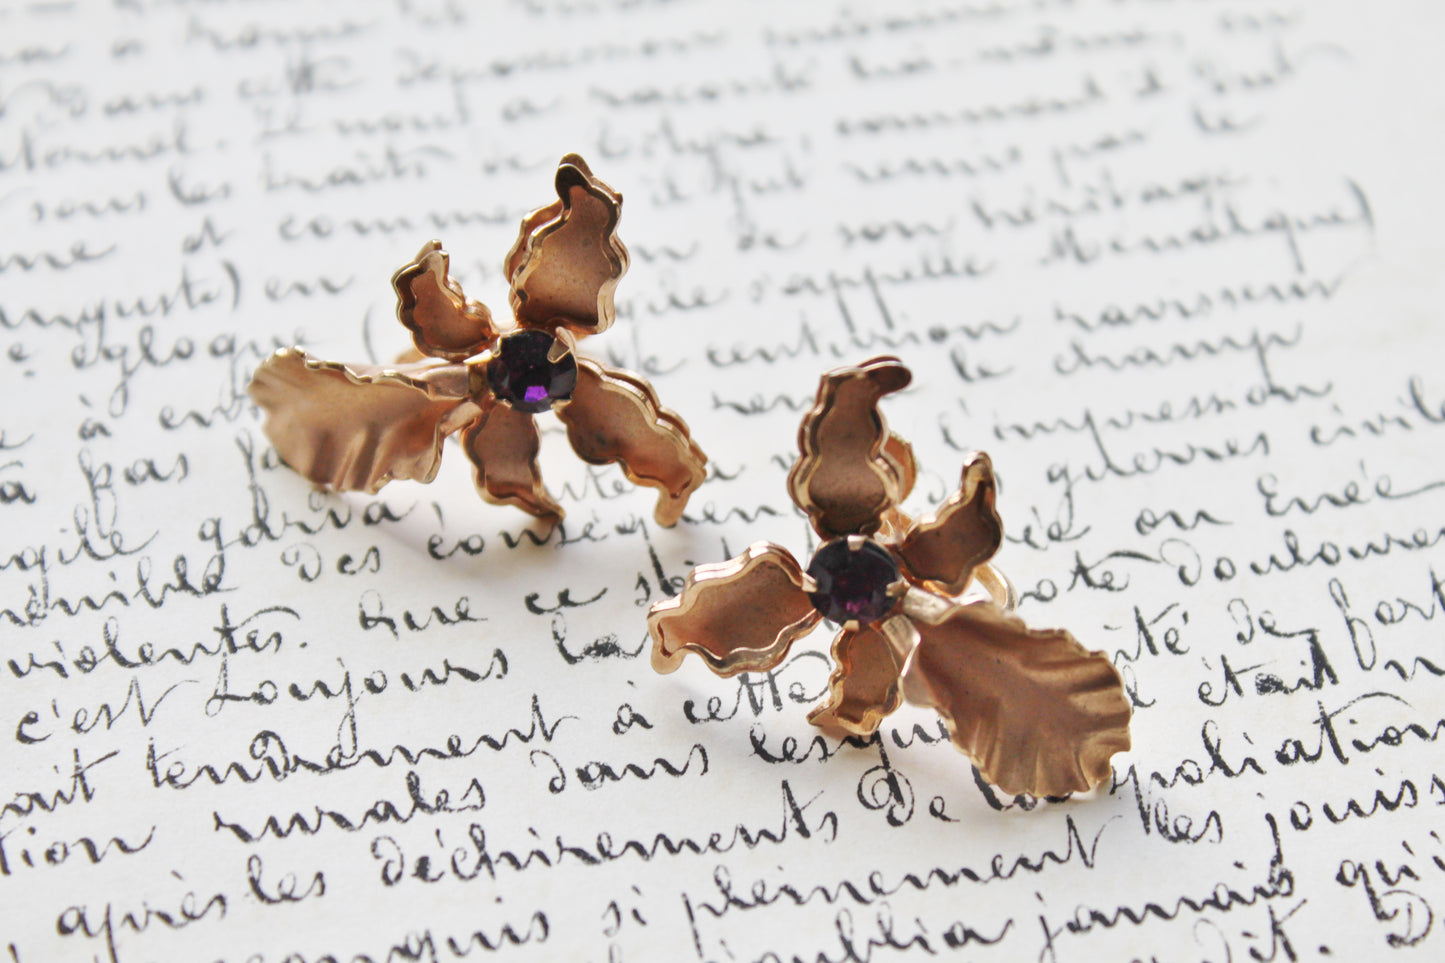 Vintage rose gold orchid earrings with amethyst crystals setting